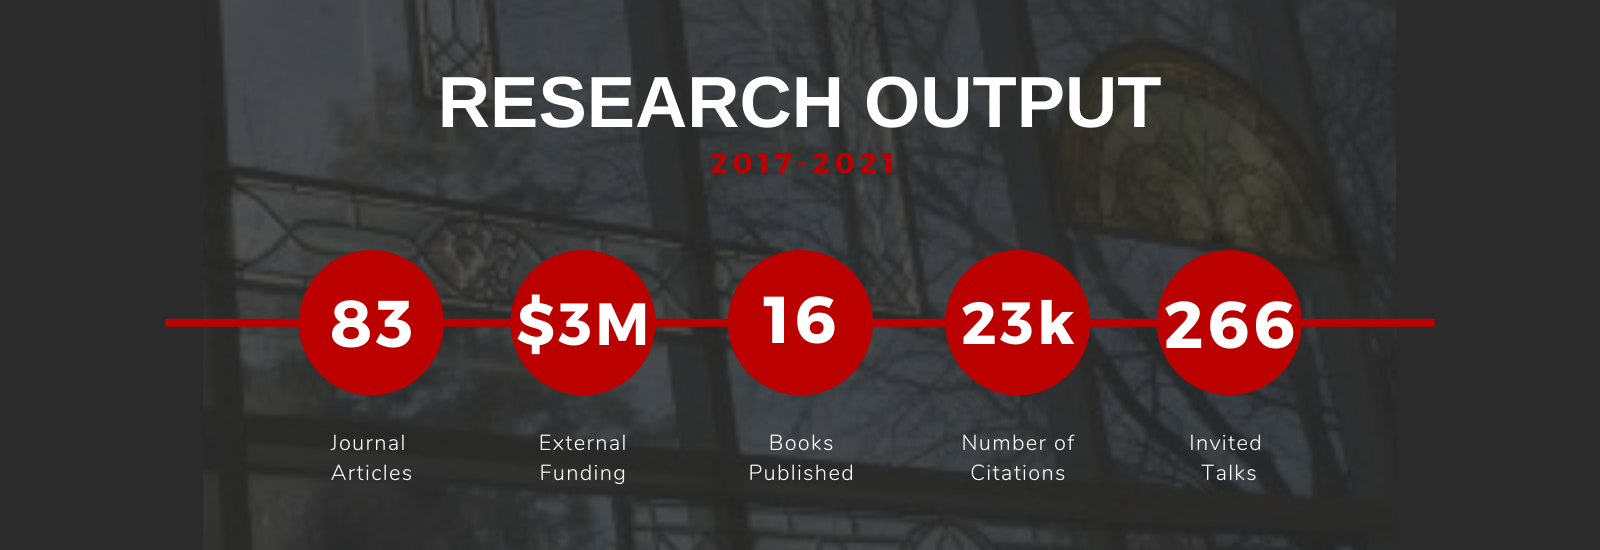 research output by the numbers